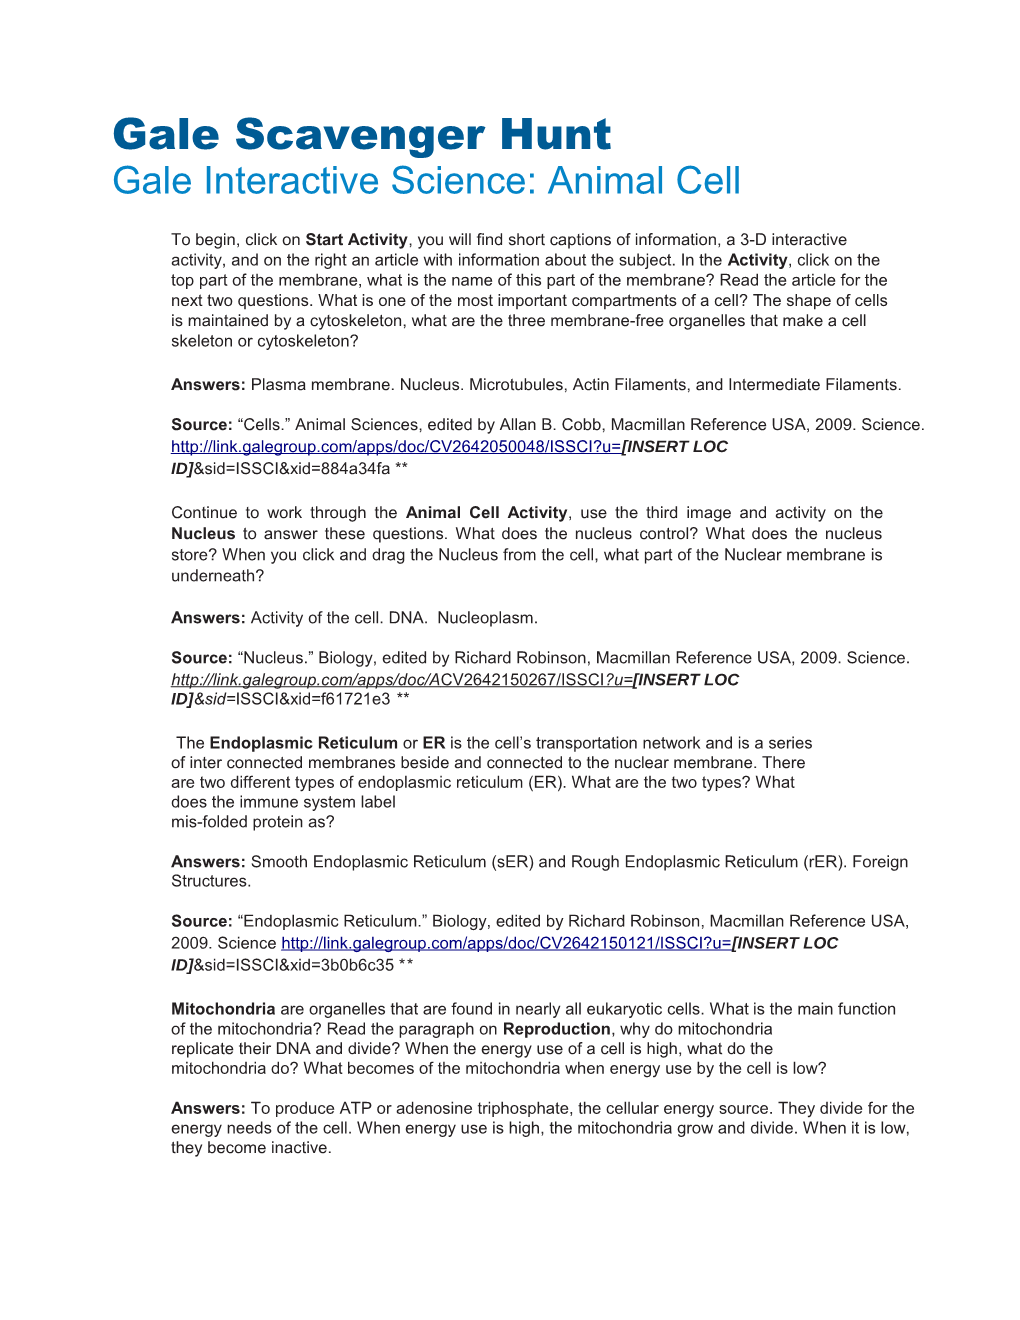 Gale Interactive Science: Animal Cell